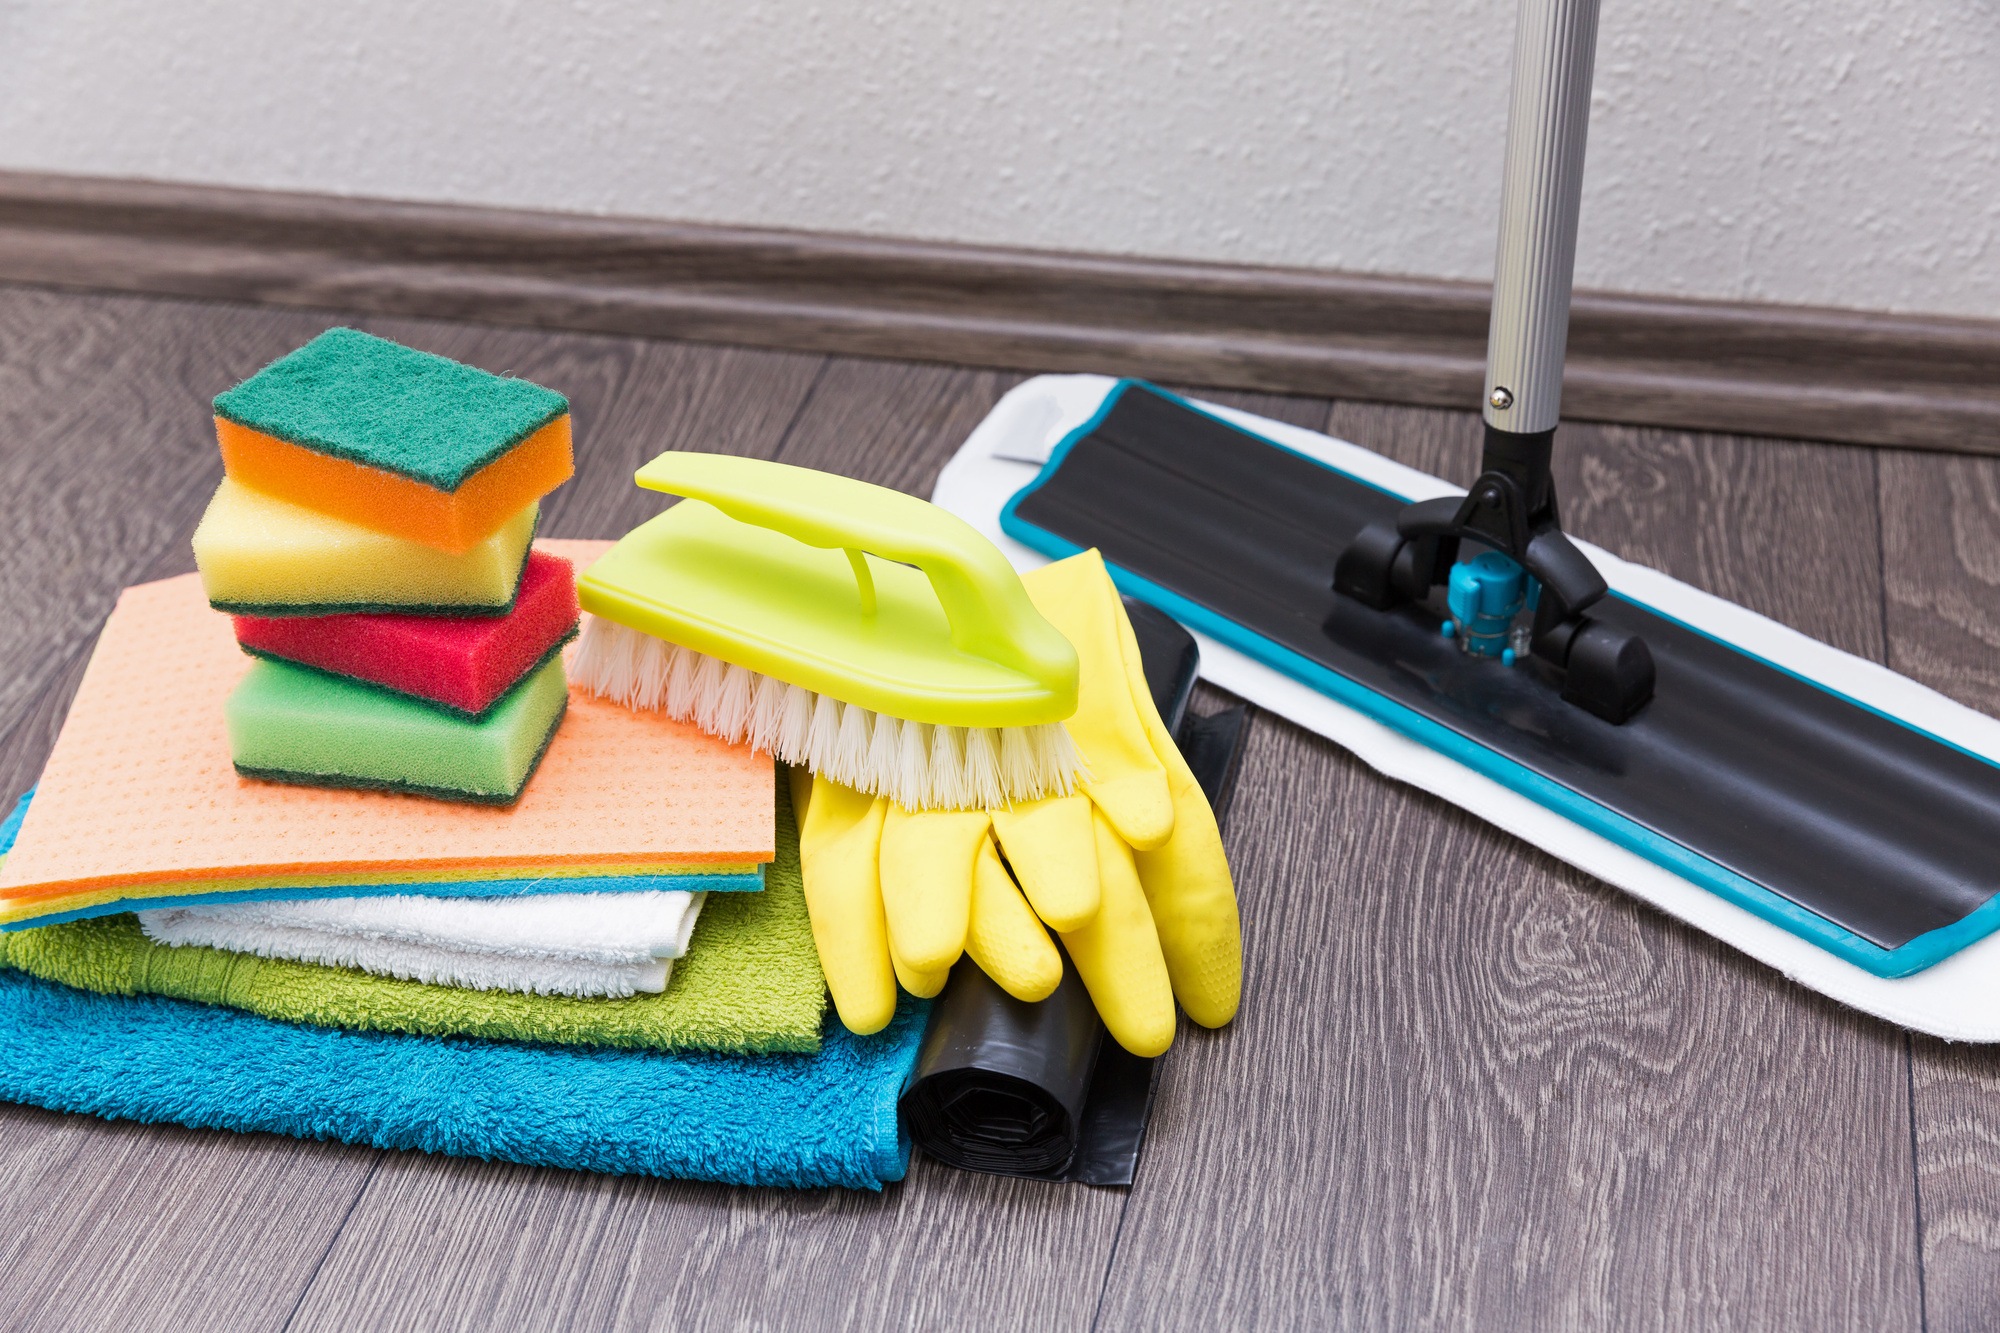 House Cleaning Materials